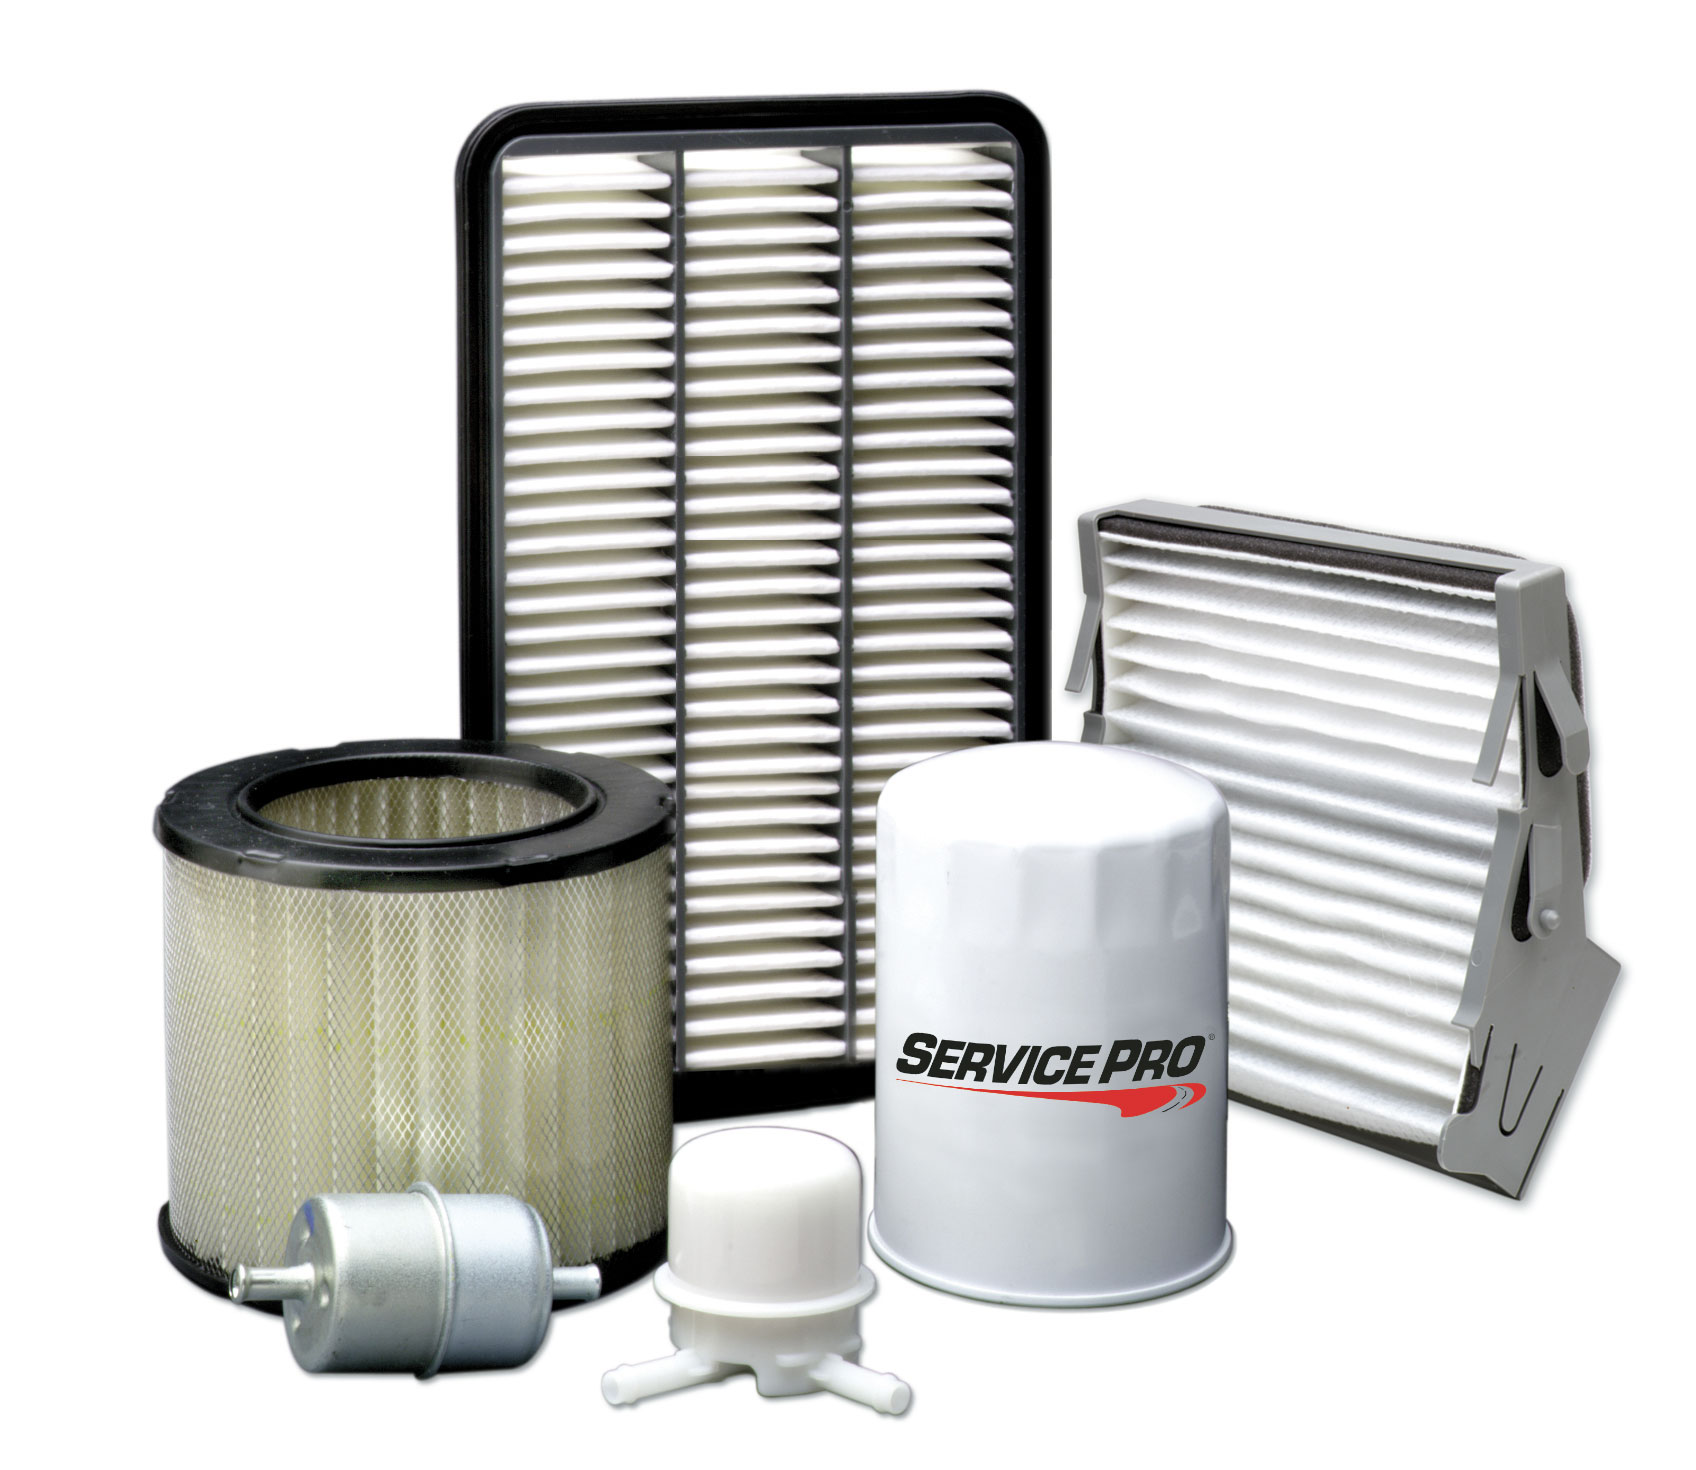 FILTER-OIL #E11830 SVC PRO 
EXTENDED PROTECTION